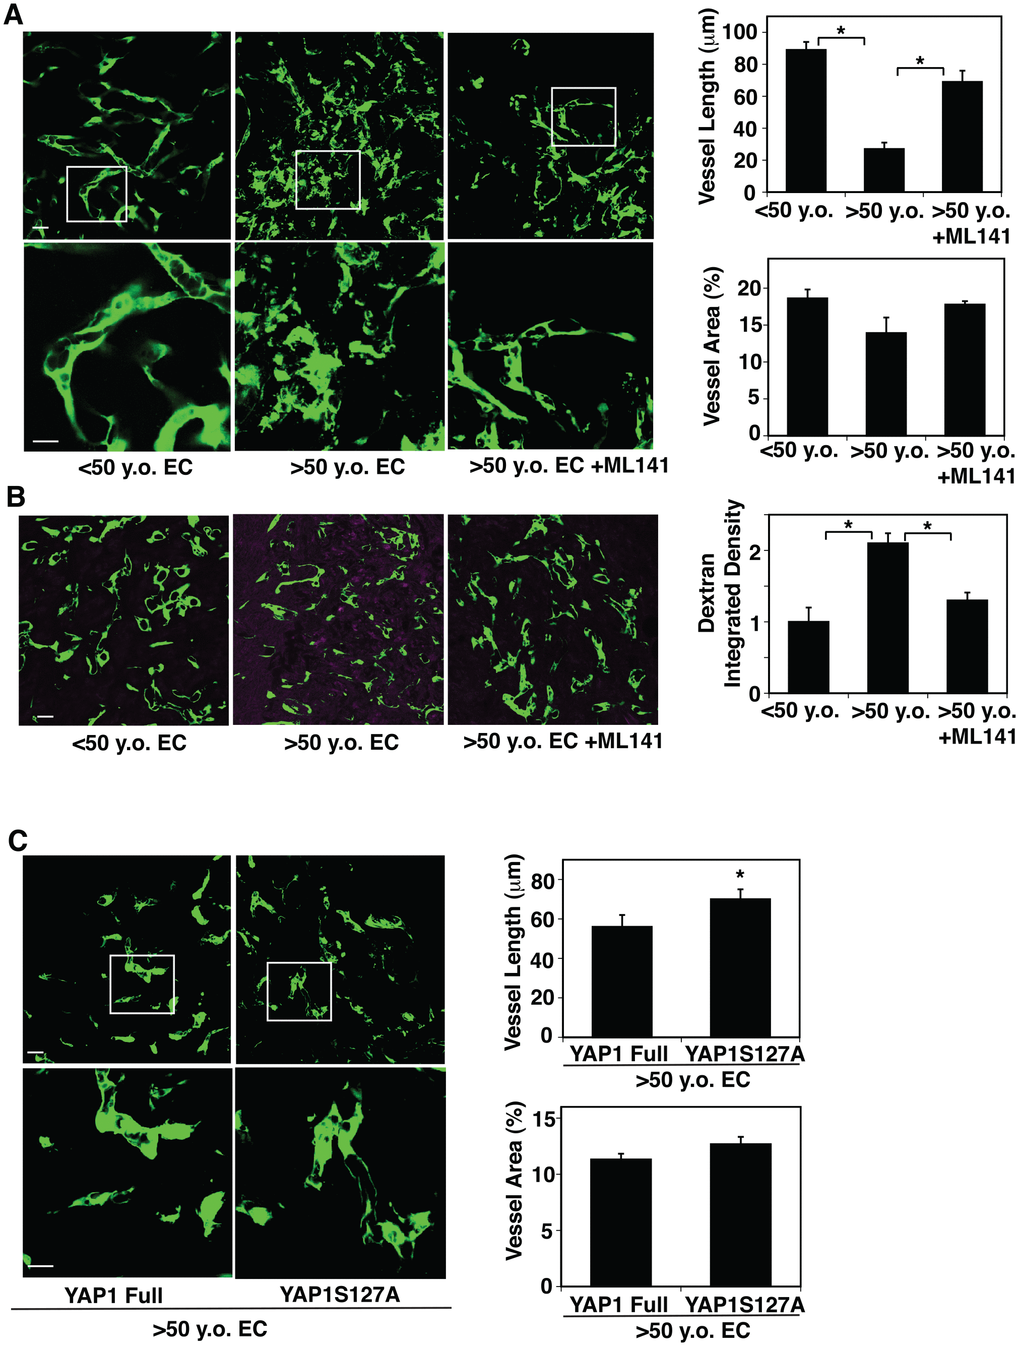 CDC42-YAP1 signaling mediates age-dependent decline in blood vessel formation in subcutaneously implanted gel. (A) IF micrographs showing vascular structures formed in the subcutaneously implanted fibrin gel supplemented with GFP-labeled ECs isolated from 50 y.o. human adipose tissues or in combination with treatment with ML141 (500 nM). Scale bar, 10 μm. Graphs showing quantification of vessel length (top) and vessel area (bottom) in the gel (n=7, mean ± s.e.m., *, pB) IF micrographs showing low MW fluorescently labeled dextran leakage (magenta) and GFP-labeled blood vessel formation (green) in the subcutaneously implanted fibrin gel supplemented with GFP-labeled ECs isolated from 50 y.o. human adipose tissues or in combination with treatment with ML141 (500 nM). Scale bar, 10 μm. Graph showing quantification of fluorescently labeled dextran leakage in the gel (n=7, mean ± s.e.m., *, pC) IF micrographs showing vascular structures formed in the subcutaneously implanted fibrin gel supplemented with GFP-labeled ECs isolated from >50 y.o. human adipose tissues in combination with treatment with retrovirus overexpressing full-length YAP1 or YAP1S127A mutant construct. Scale bar, 10 μm. Graphs showing quantification of vessel length (top) and vessel area (bottom) in the gel (n=7, mean ± s.e.m., *, p